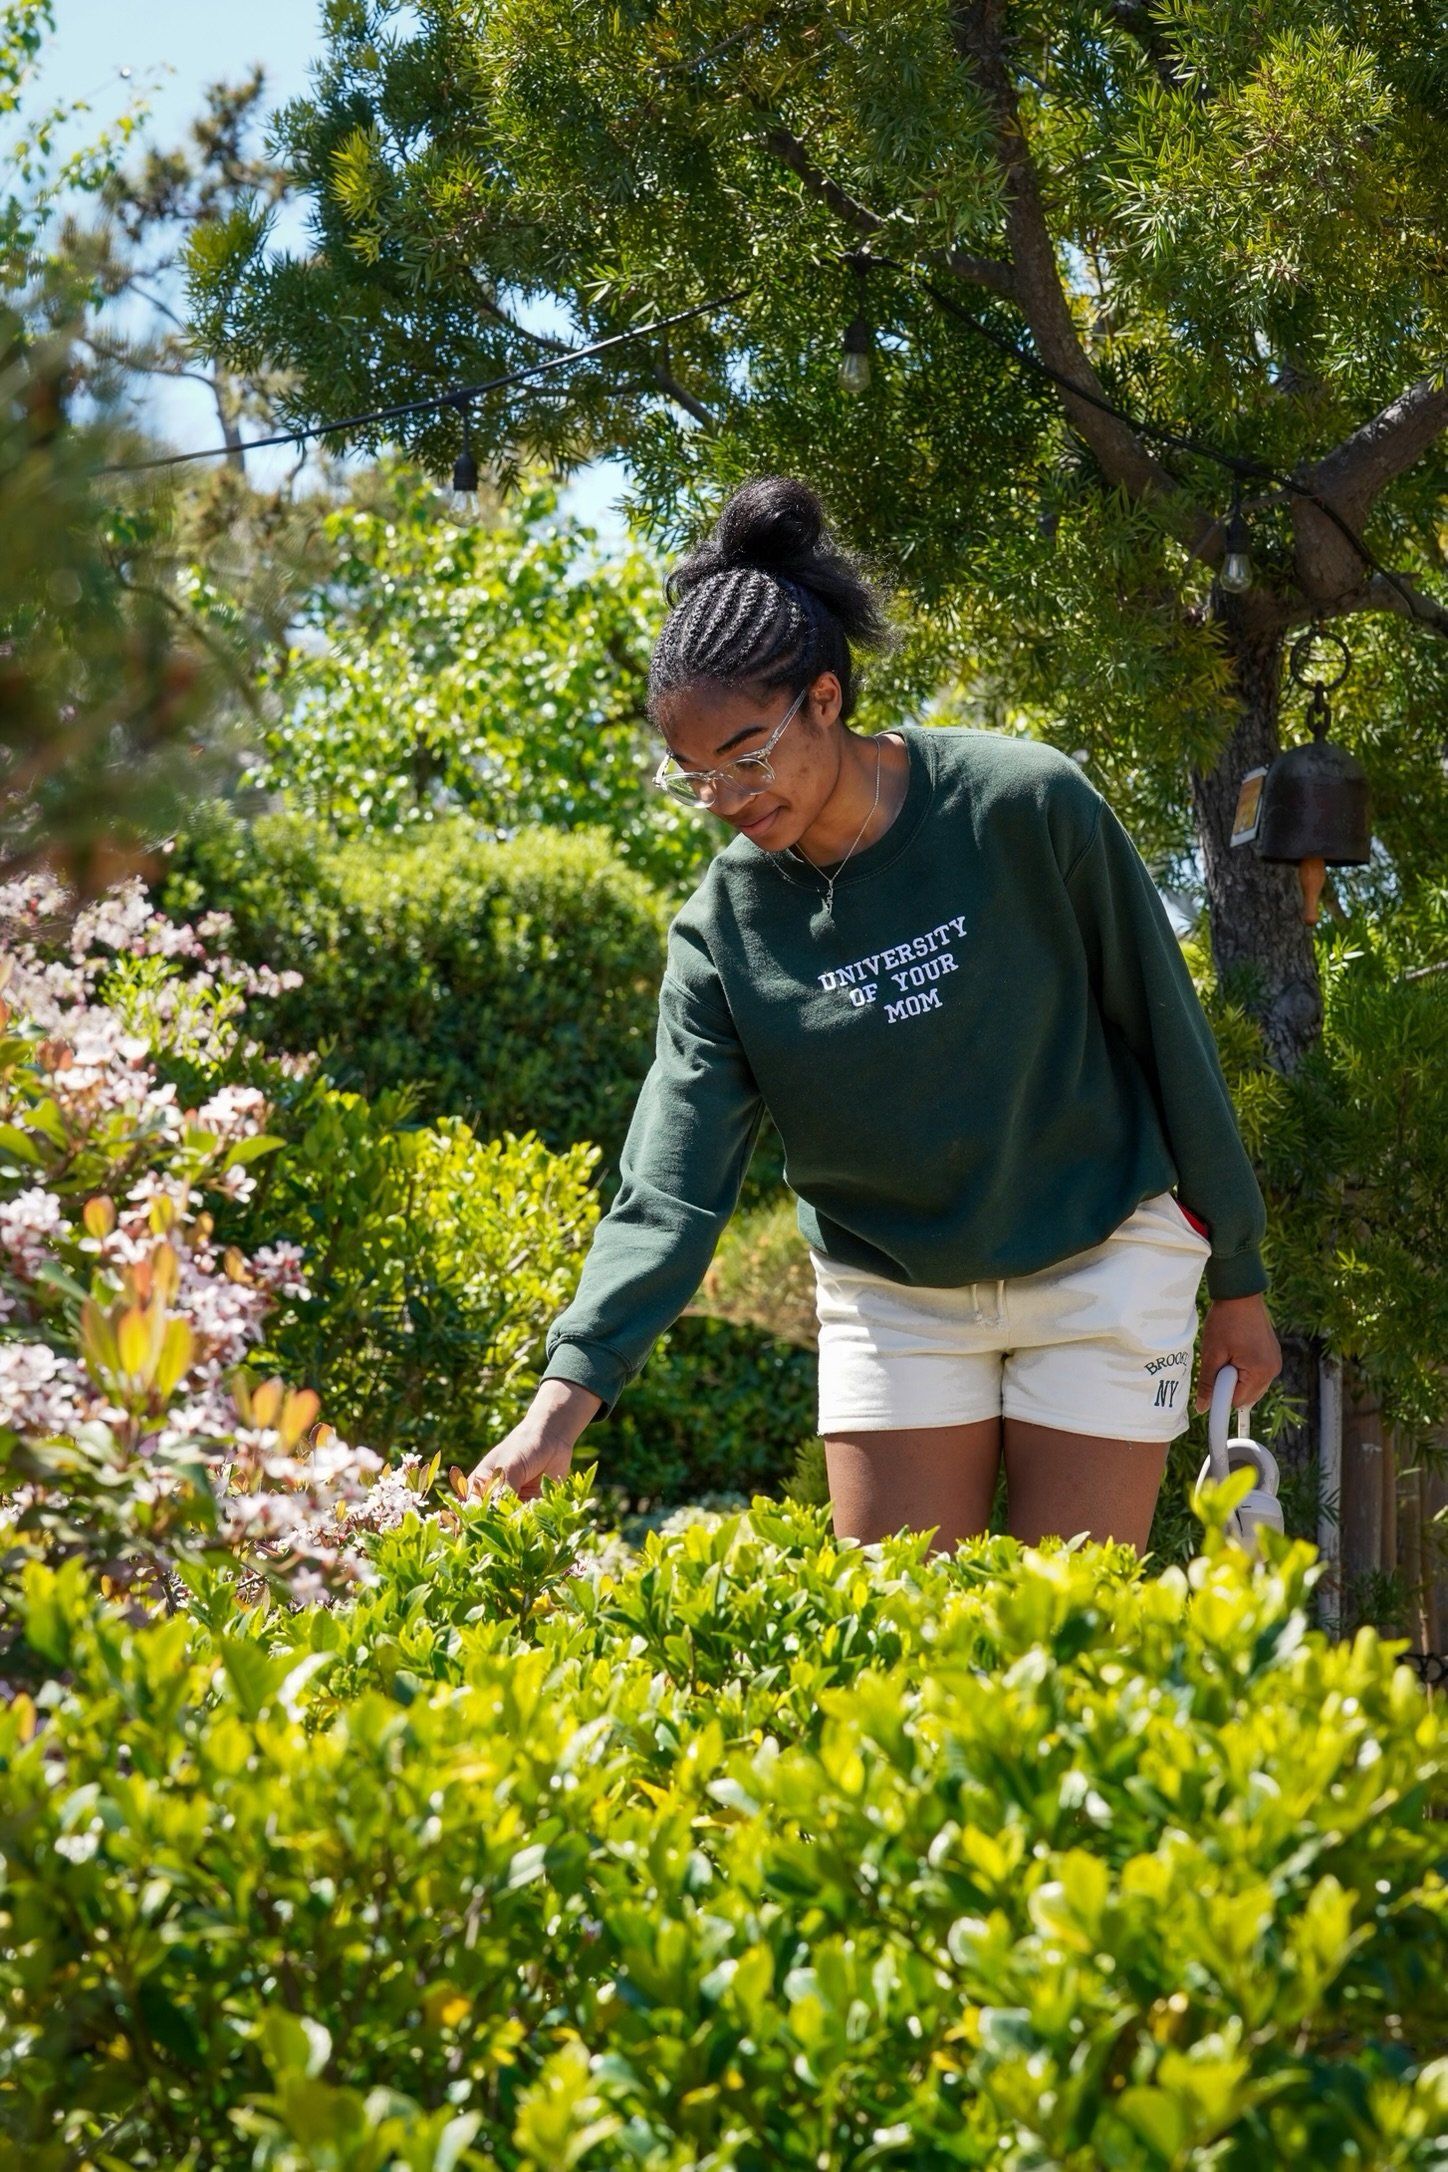  Sydney Woodley touches the flowers on the shrub. Photo by Kimberly Carrillo 